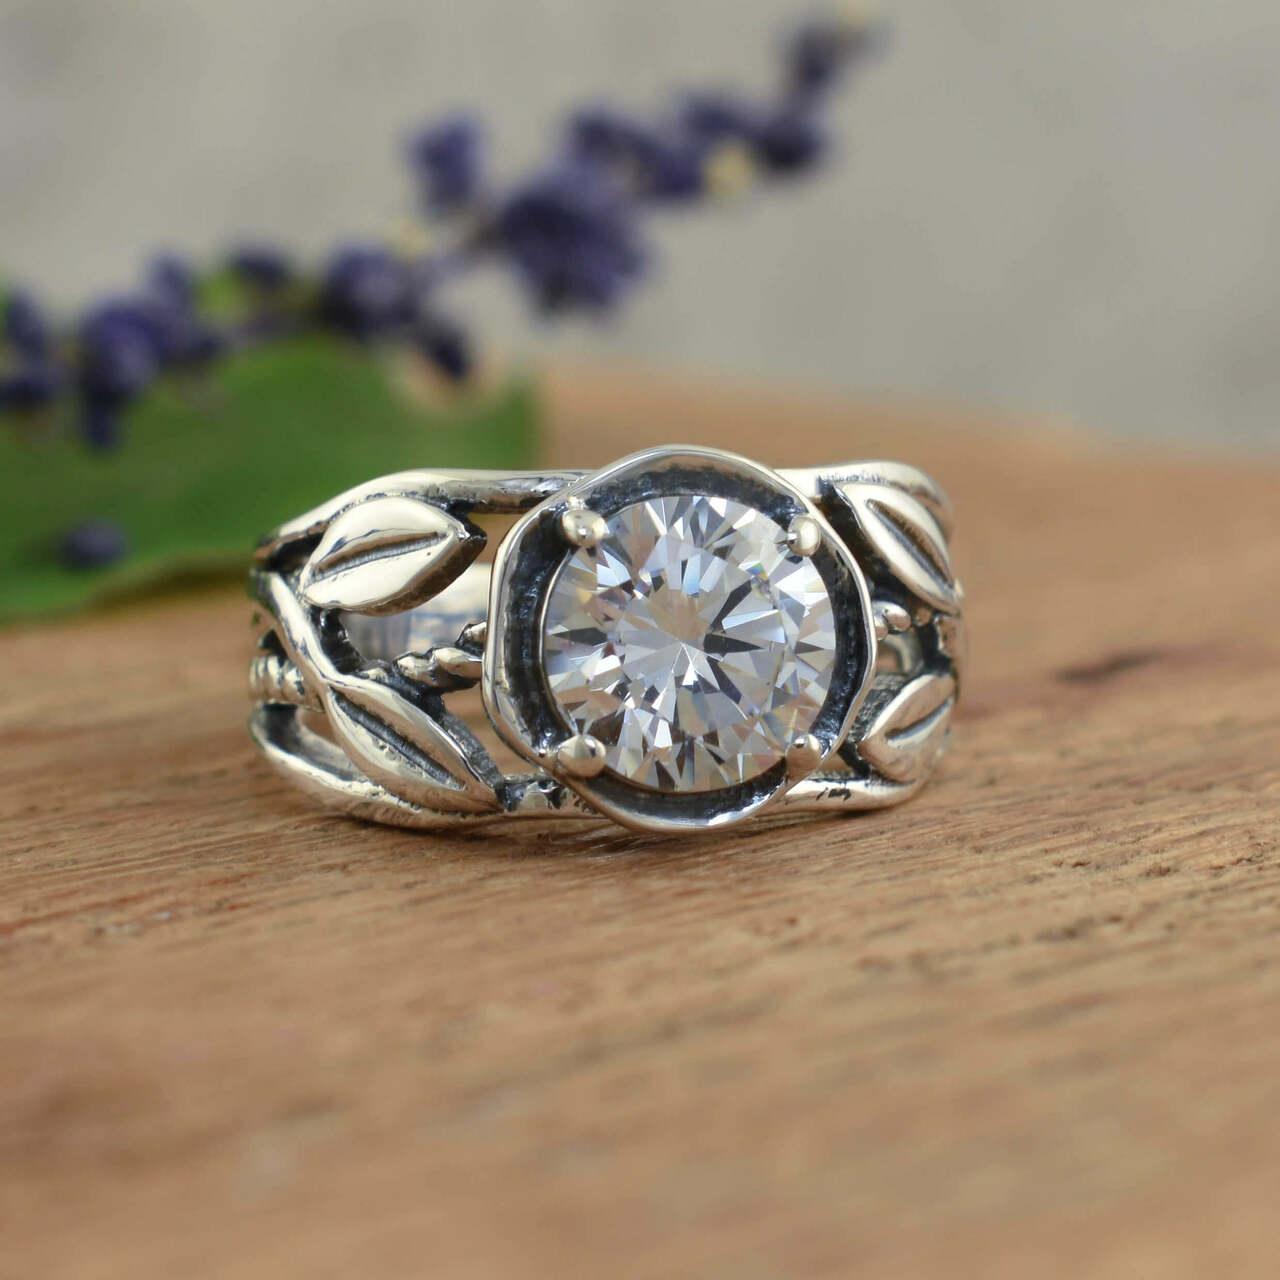 Designer sterling silver ring with vine detail and round cz stone